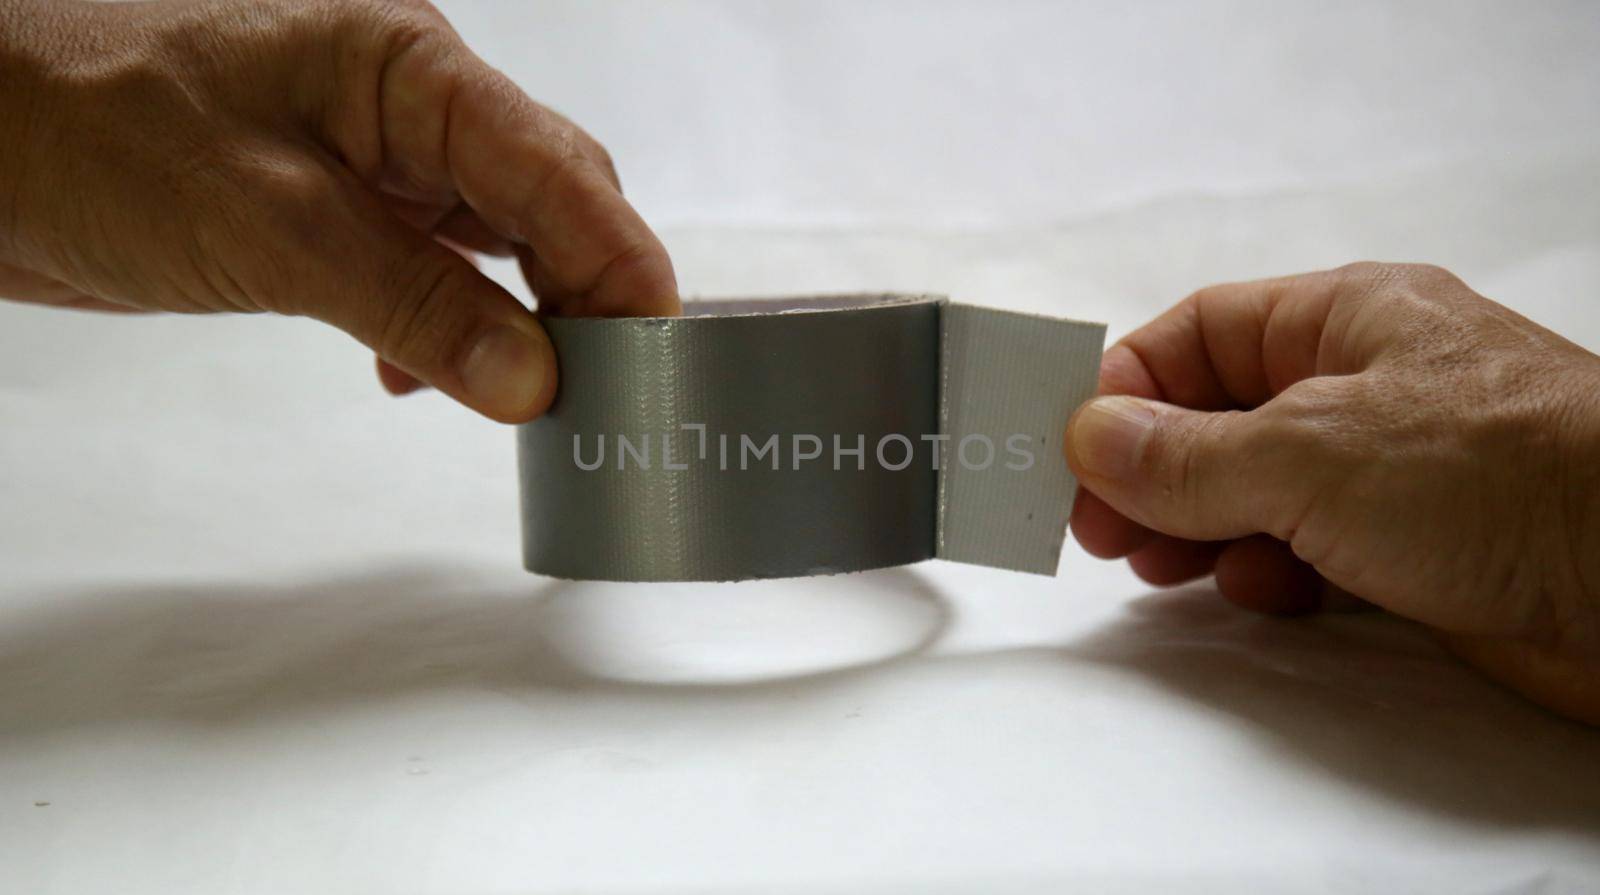 salvador, bahia / brazil - may 24, 2020: hand opening adhesive tape on a roll.